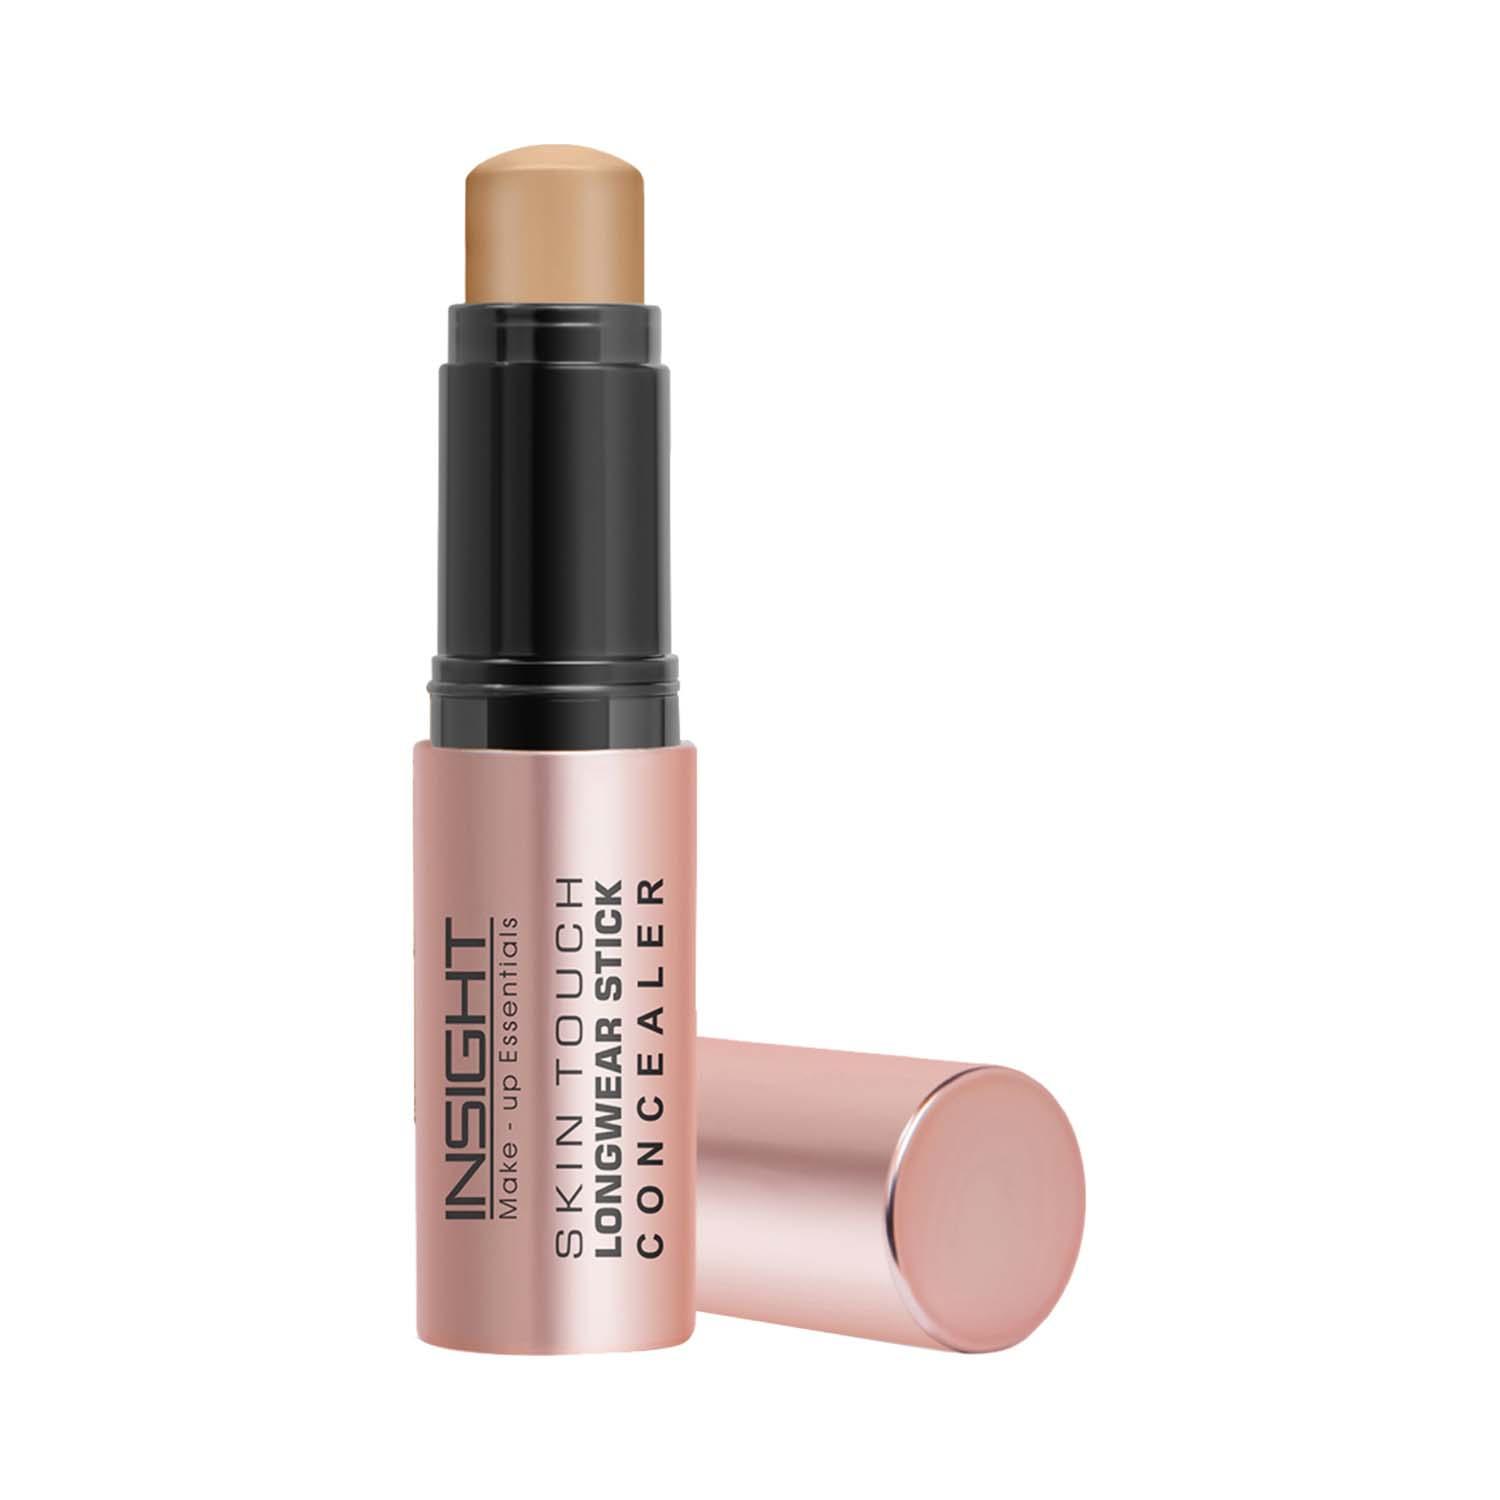 Insight Cosmetics | Insight Cosmetics Skin Touch Longwear Concealer - MN35 (5 g)